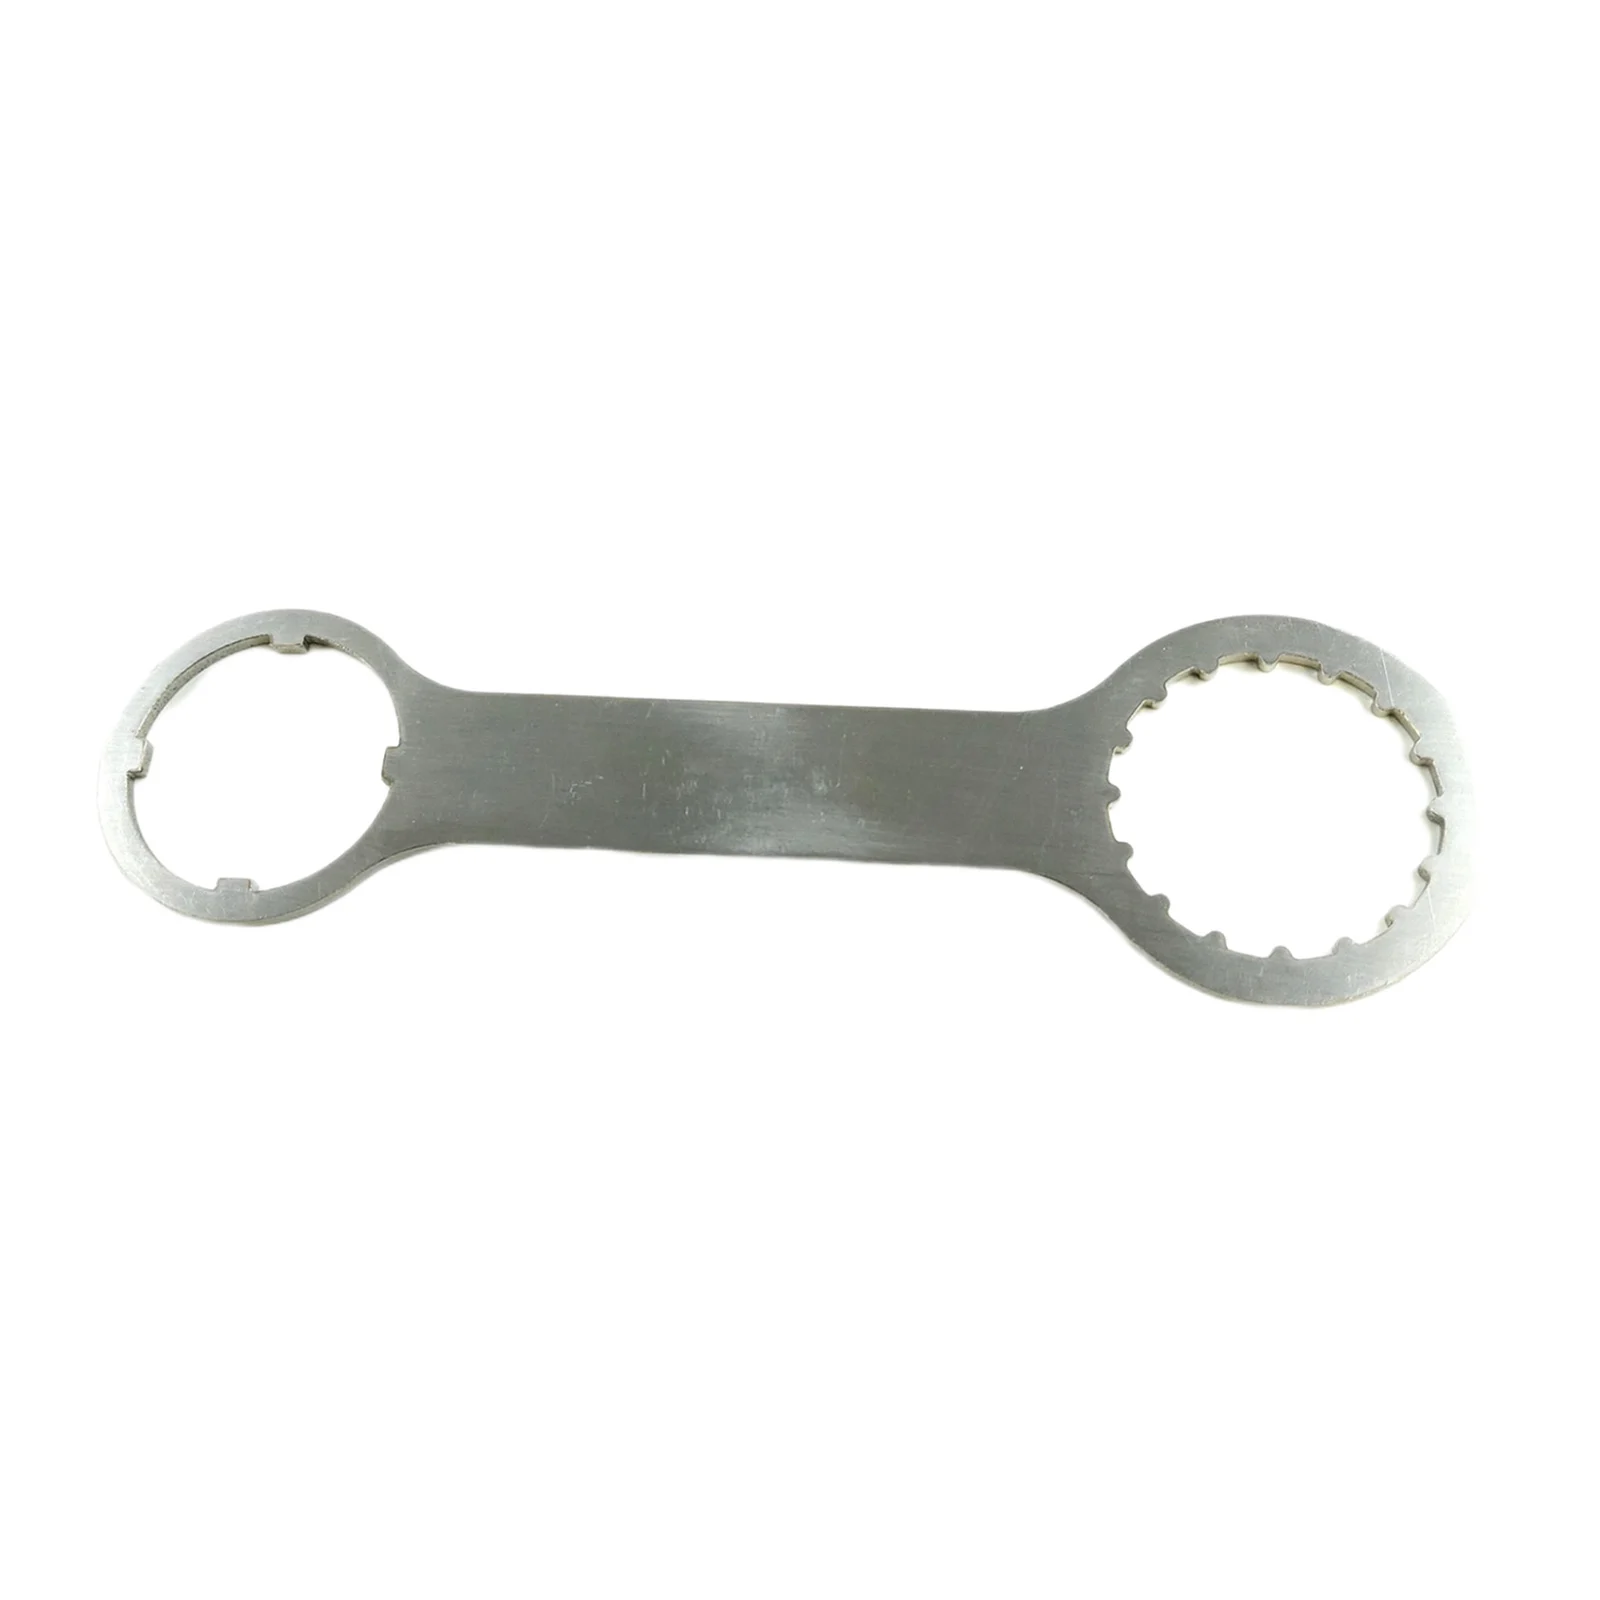 Universal Installation Lightweight Wrench For BAFANG BBS BBS01 BBS02 Mid Drive System Installation Tools Bike Repair Tools